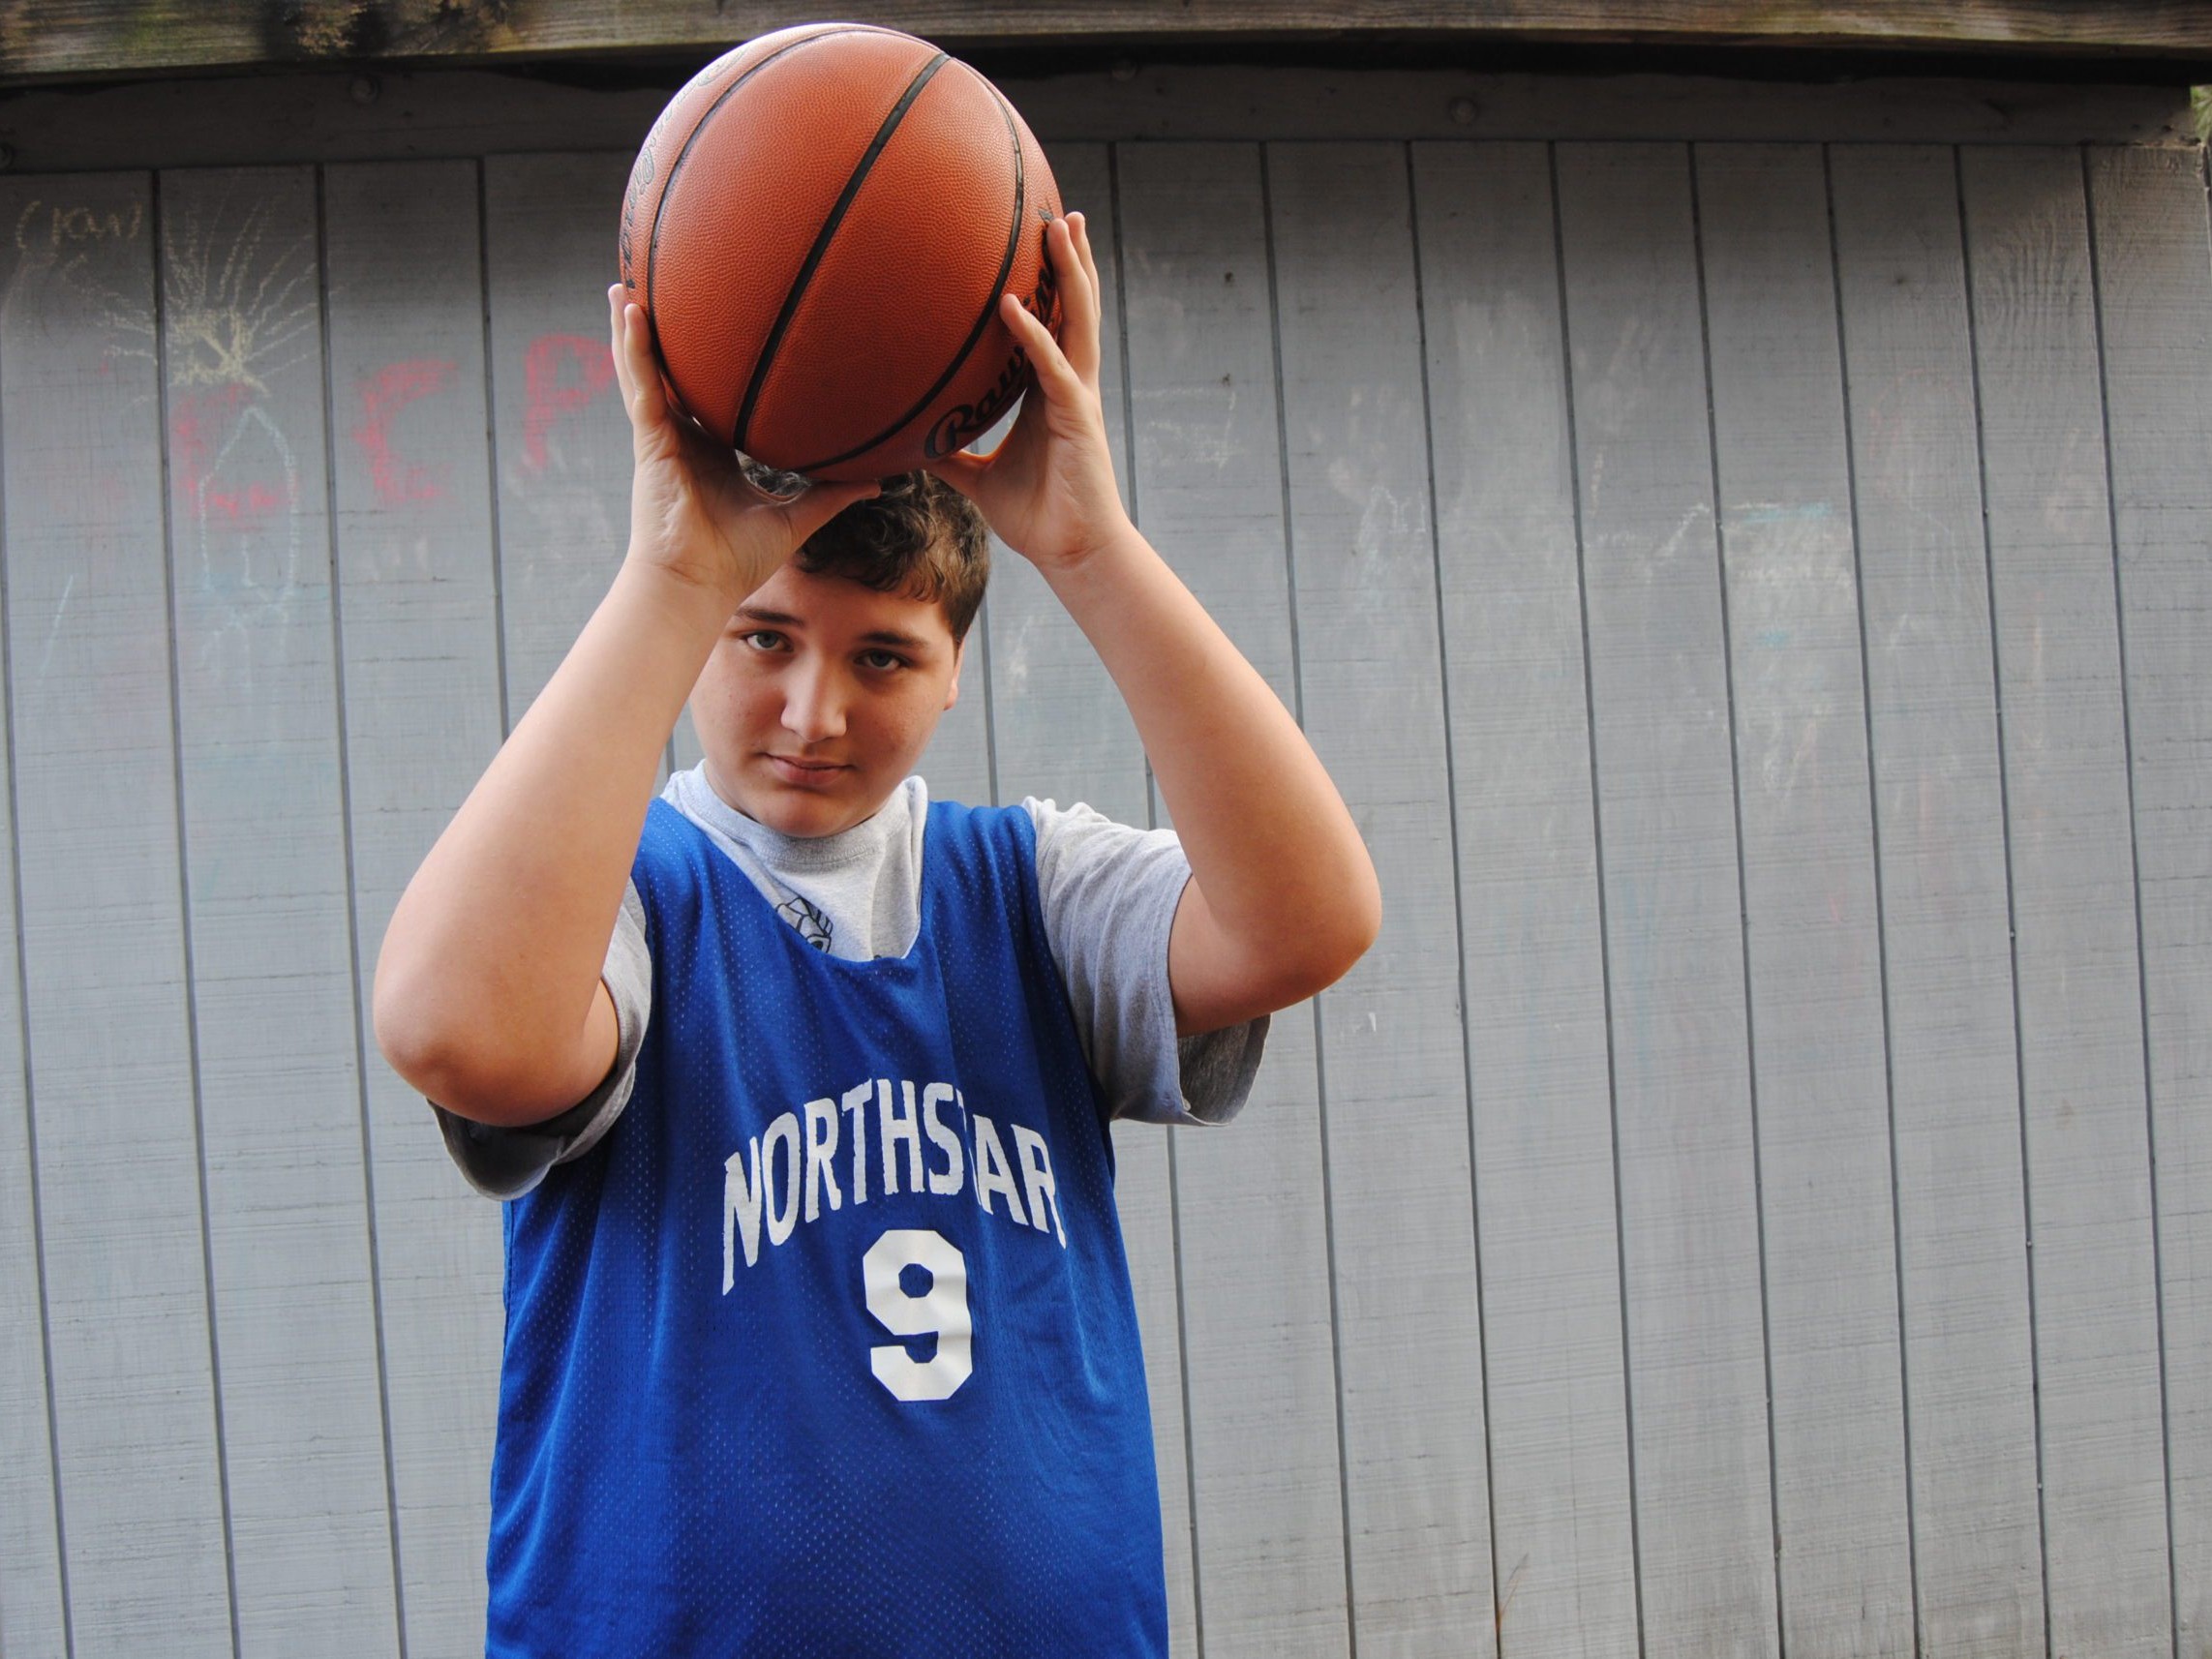 student holding basketball wearing Northstar jersey